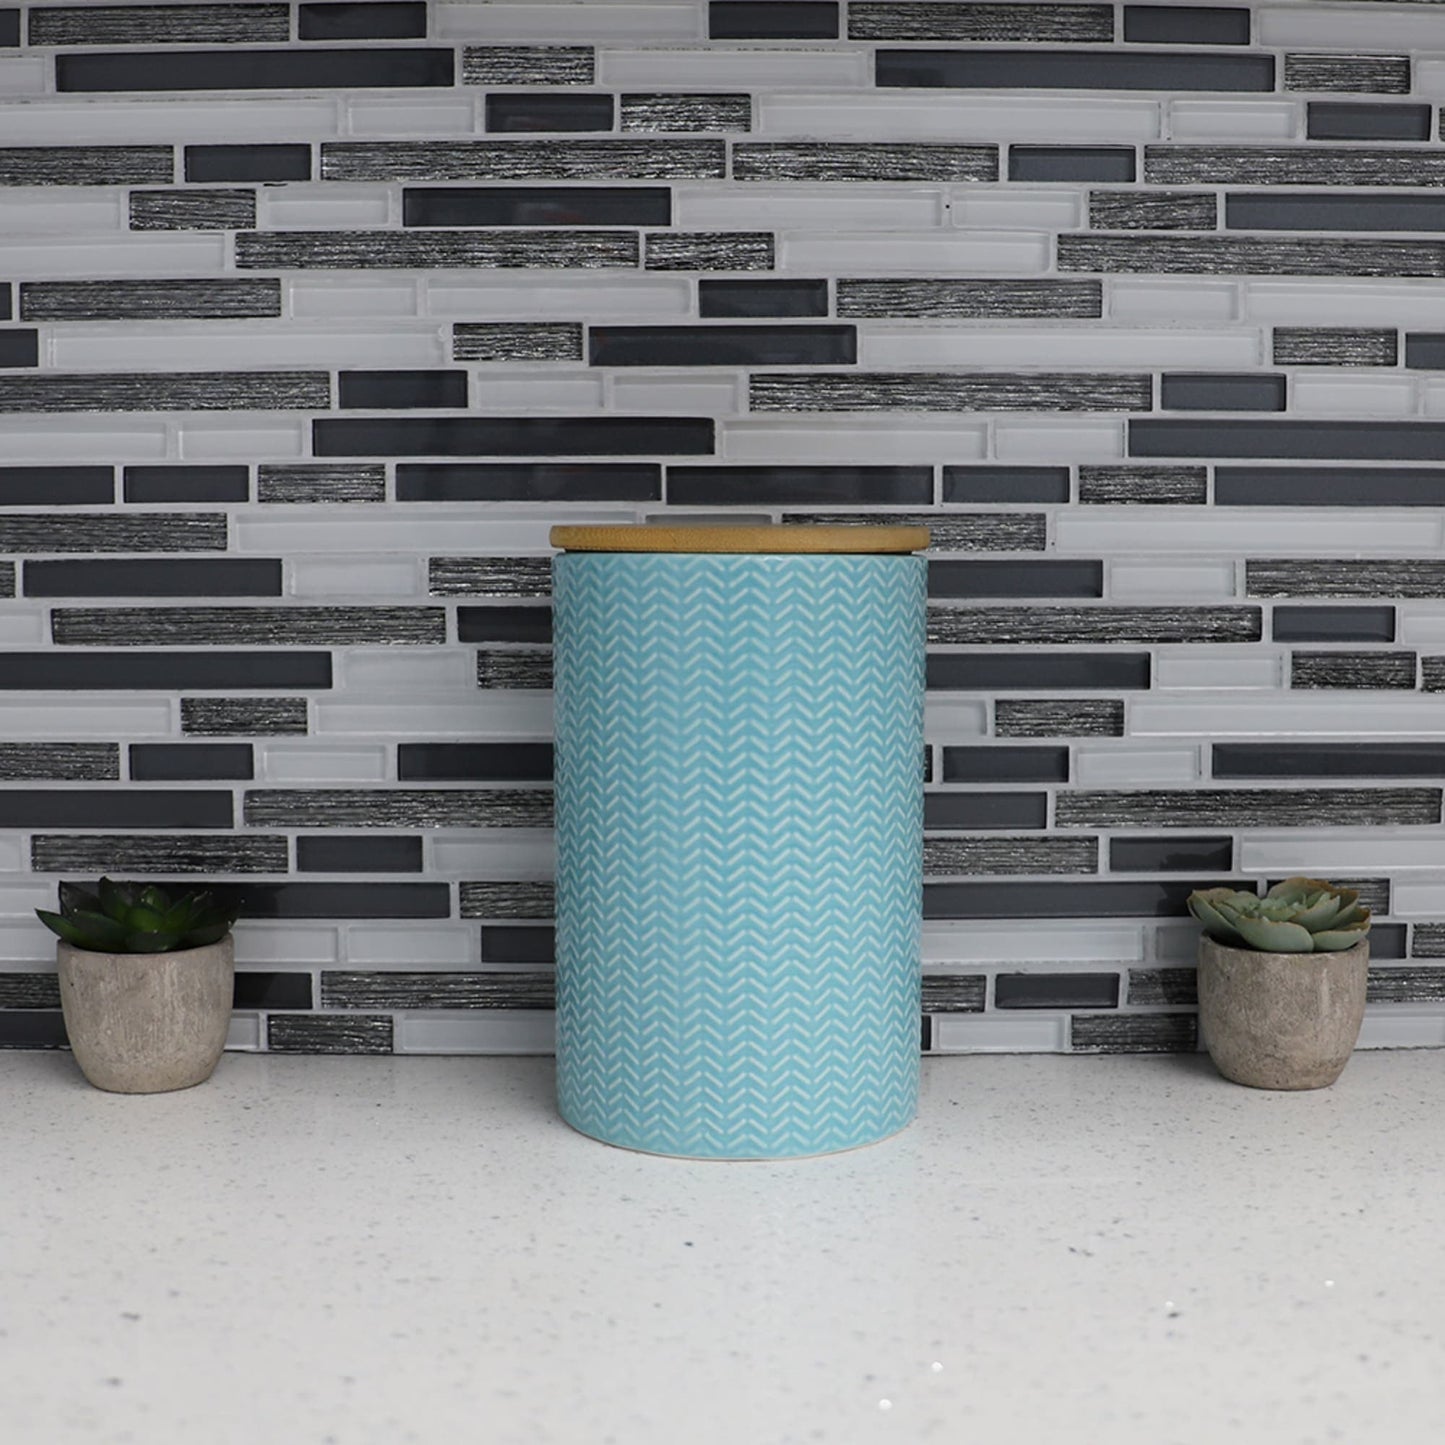 Wave Large Ceramic Canister, Turquoise